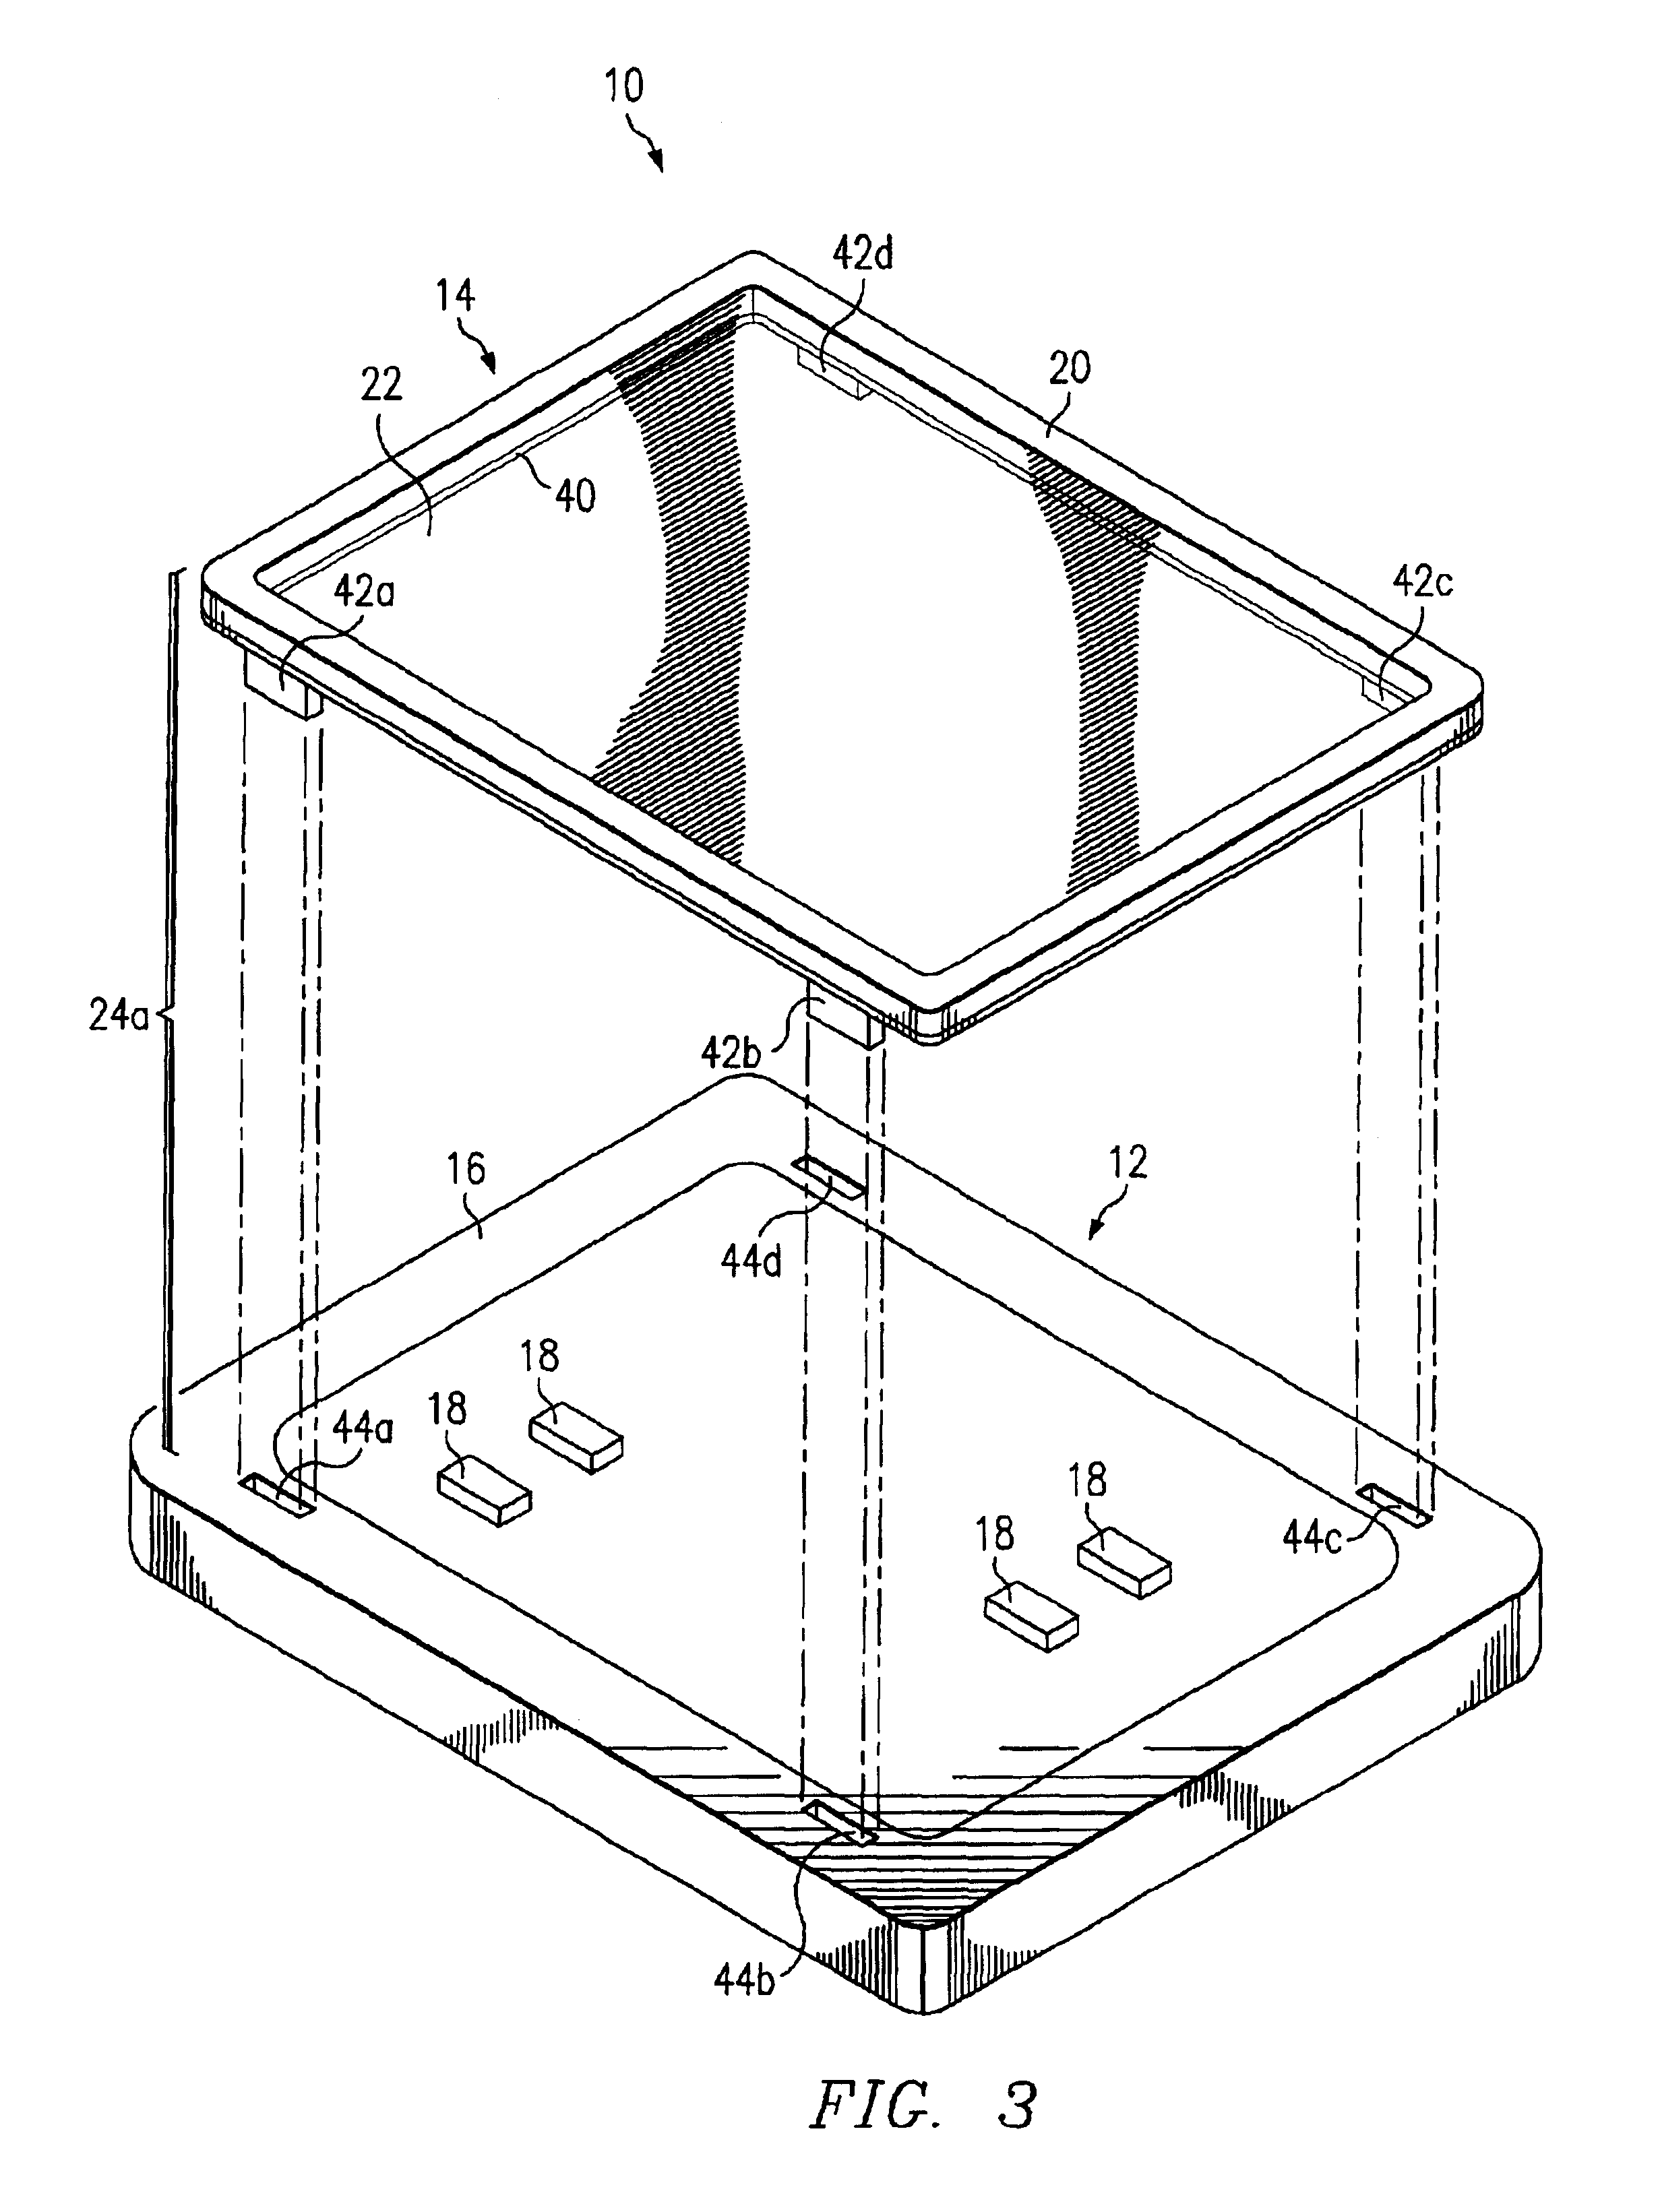 Method and apparatus for coupling a pellicle to a photomask using a non-distorting mechanism